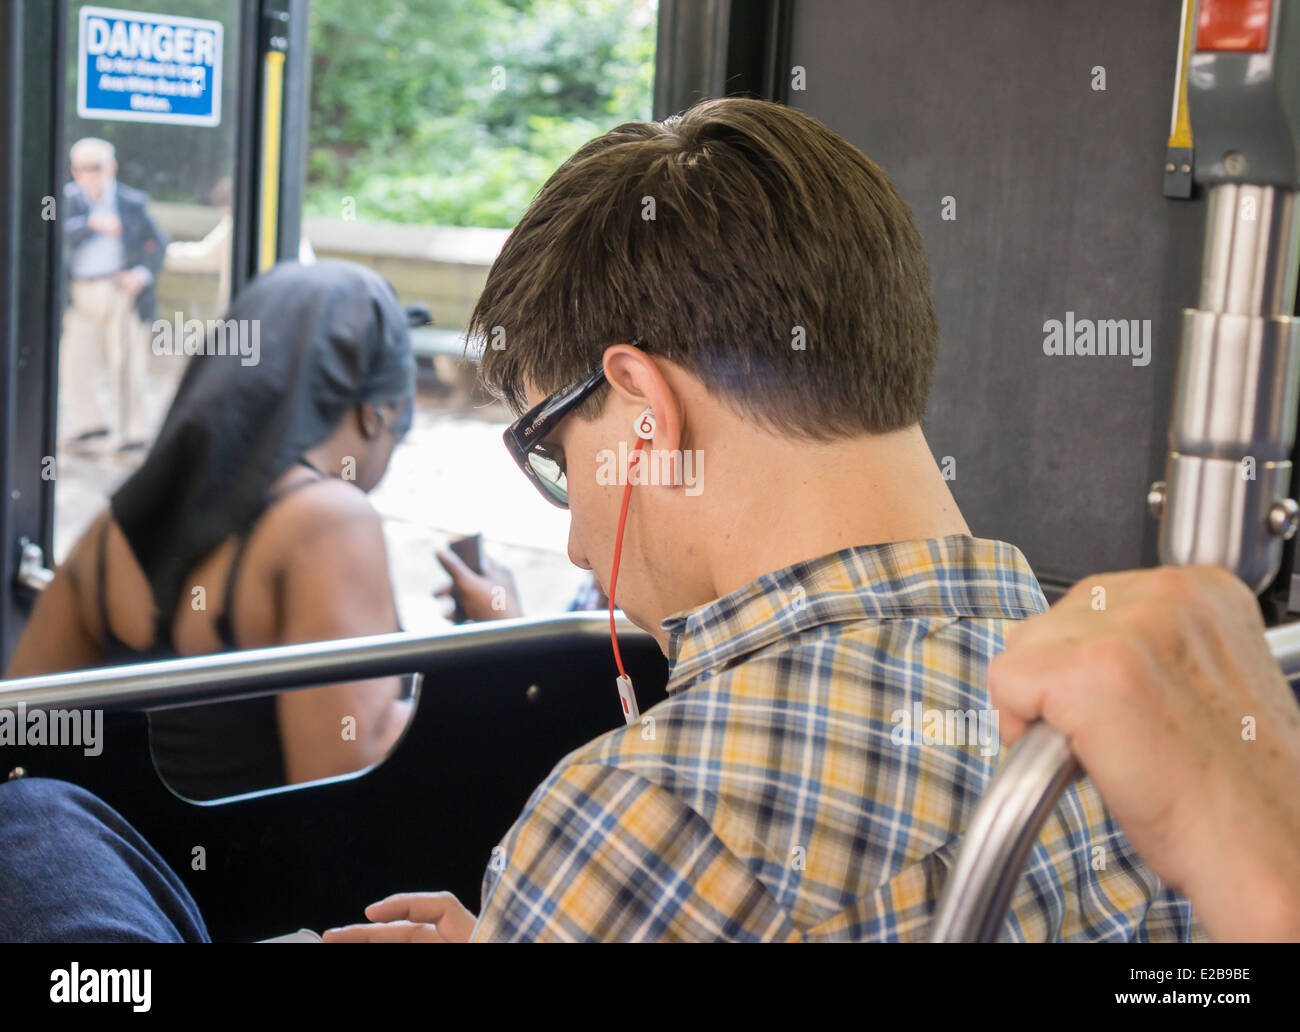 A bus rider wears his Beats by Dr. Dre earbud while riding on Friday, June 13, 2014 (© Richard B. Levine) Stock Photo